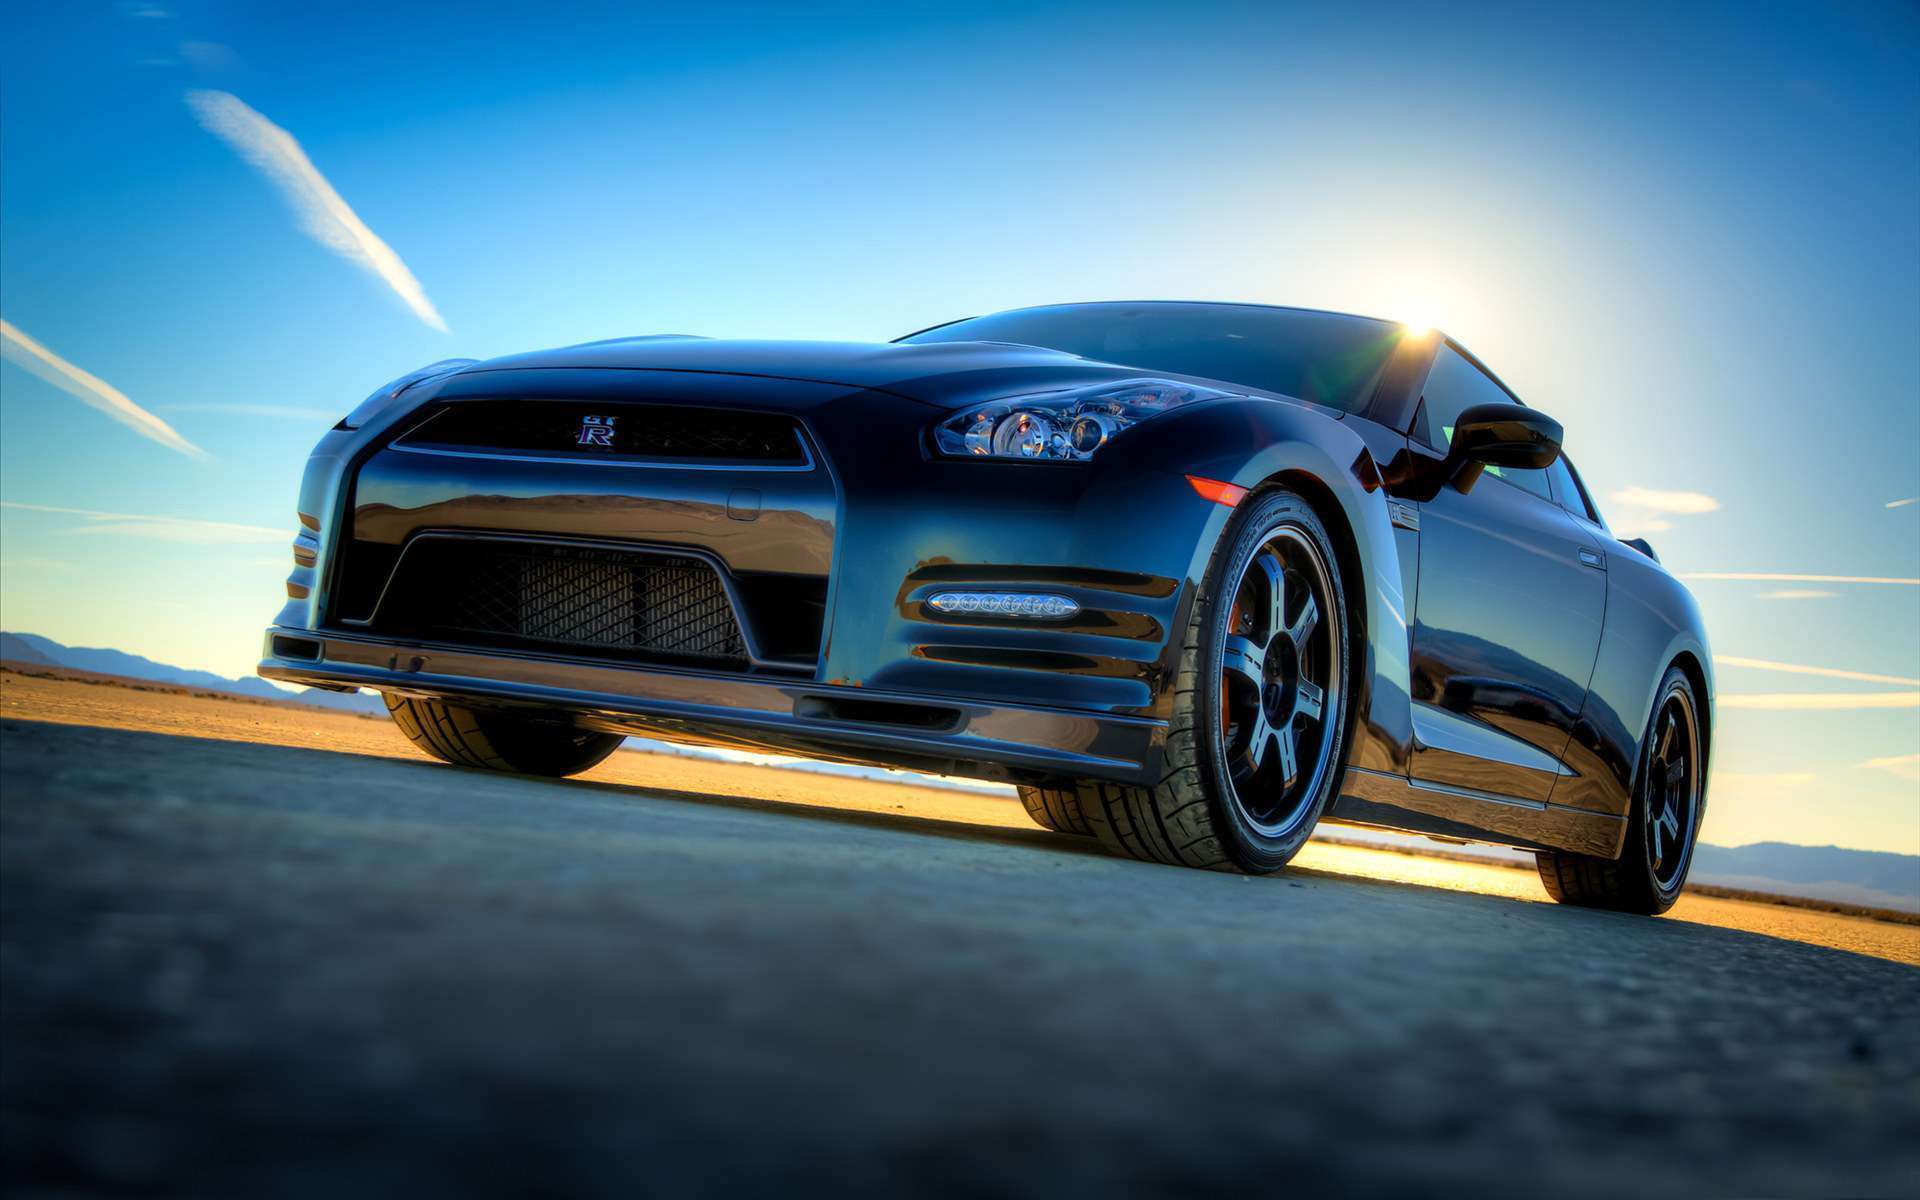 2014 Nissan Gt R Track Edition Hd Wallpapers Hd Car Wallpapers